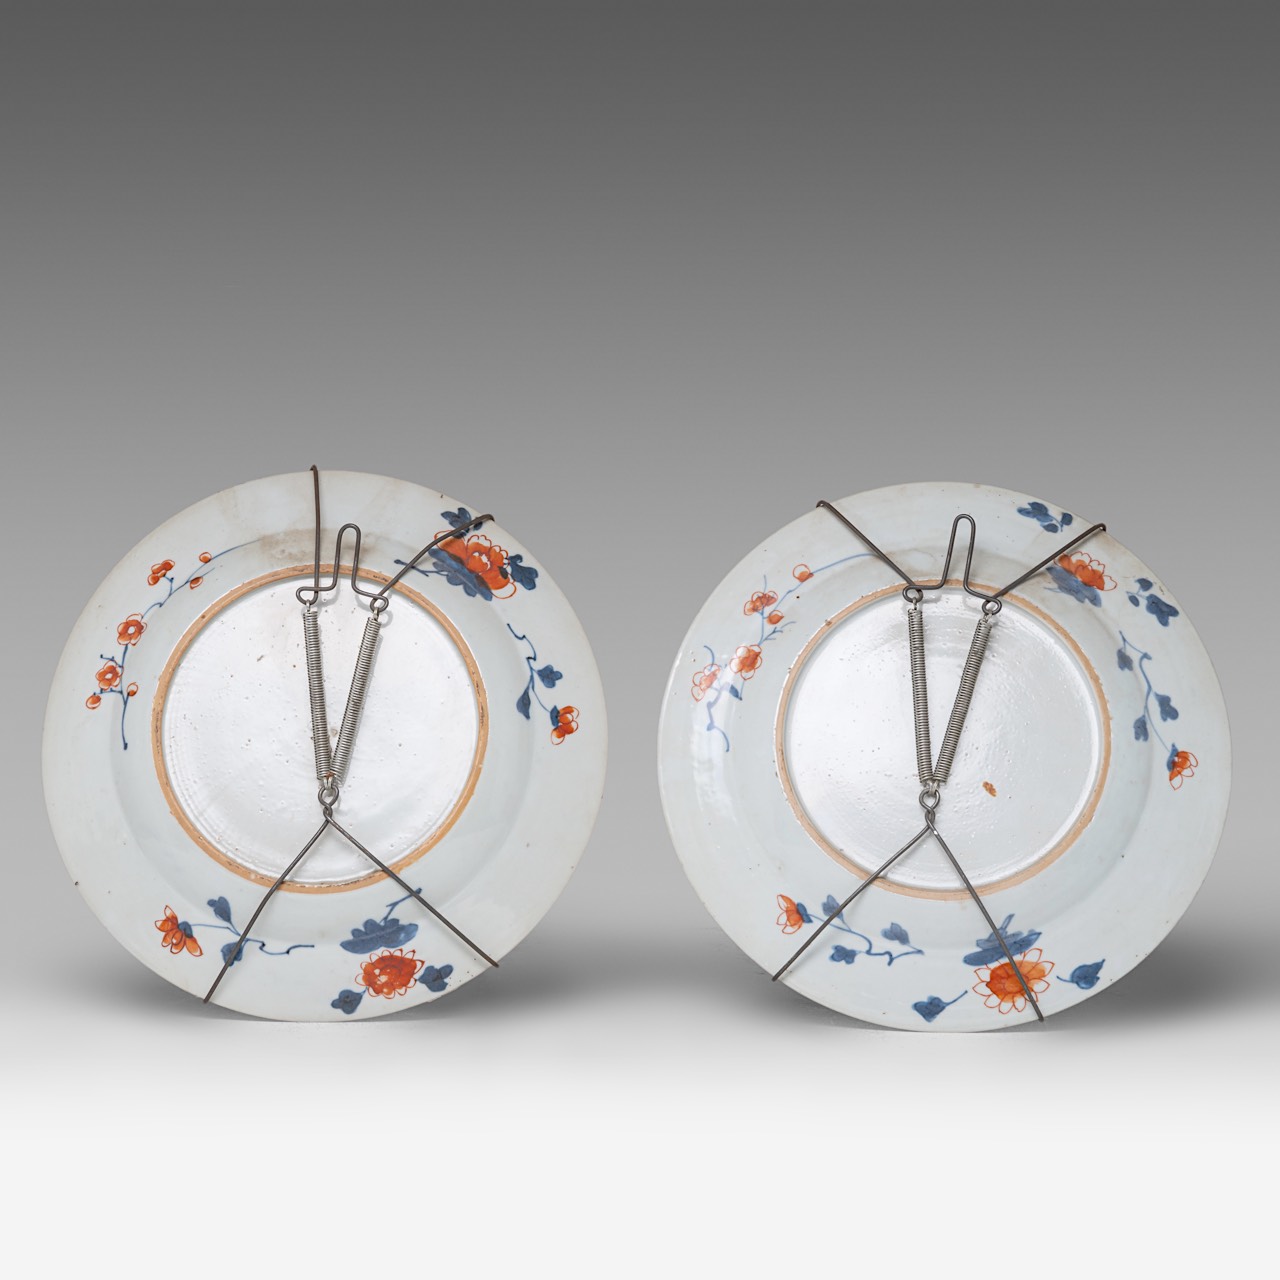 A series of six Chinese Imari 'Flower Basket' dishes, 18thC, dia 23 cm - Image 7 of 7